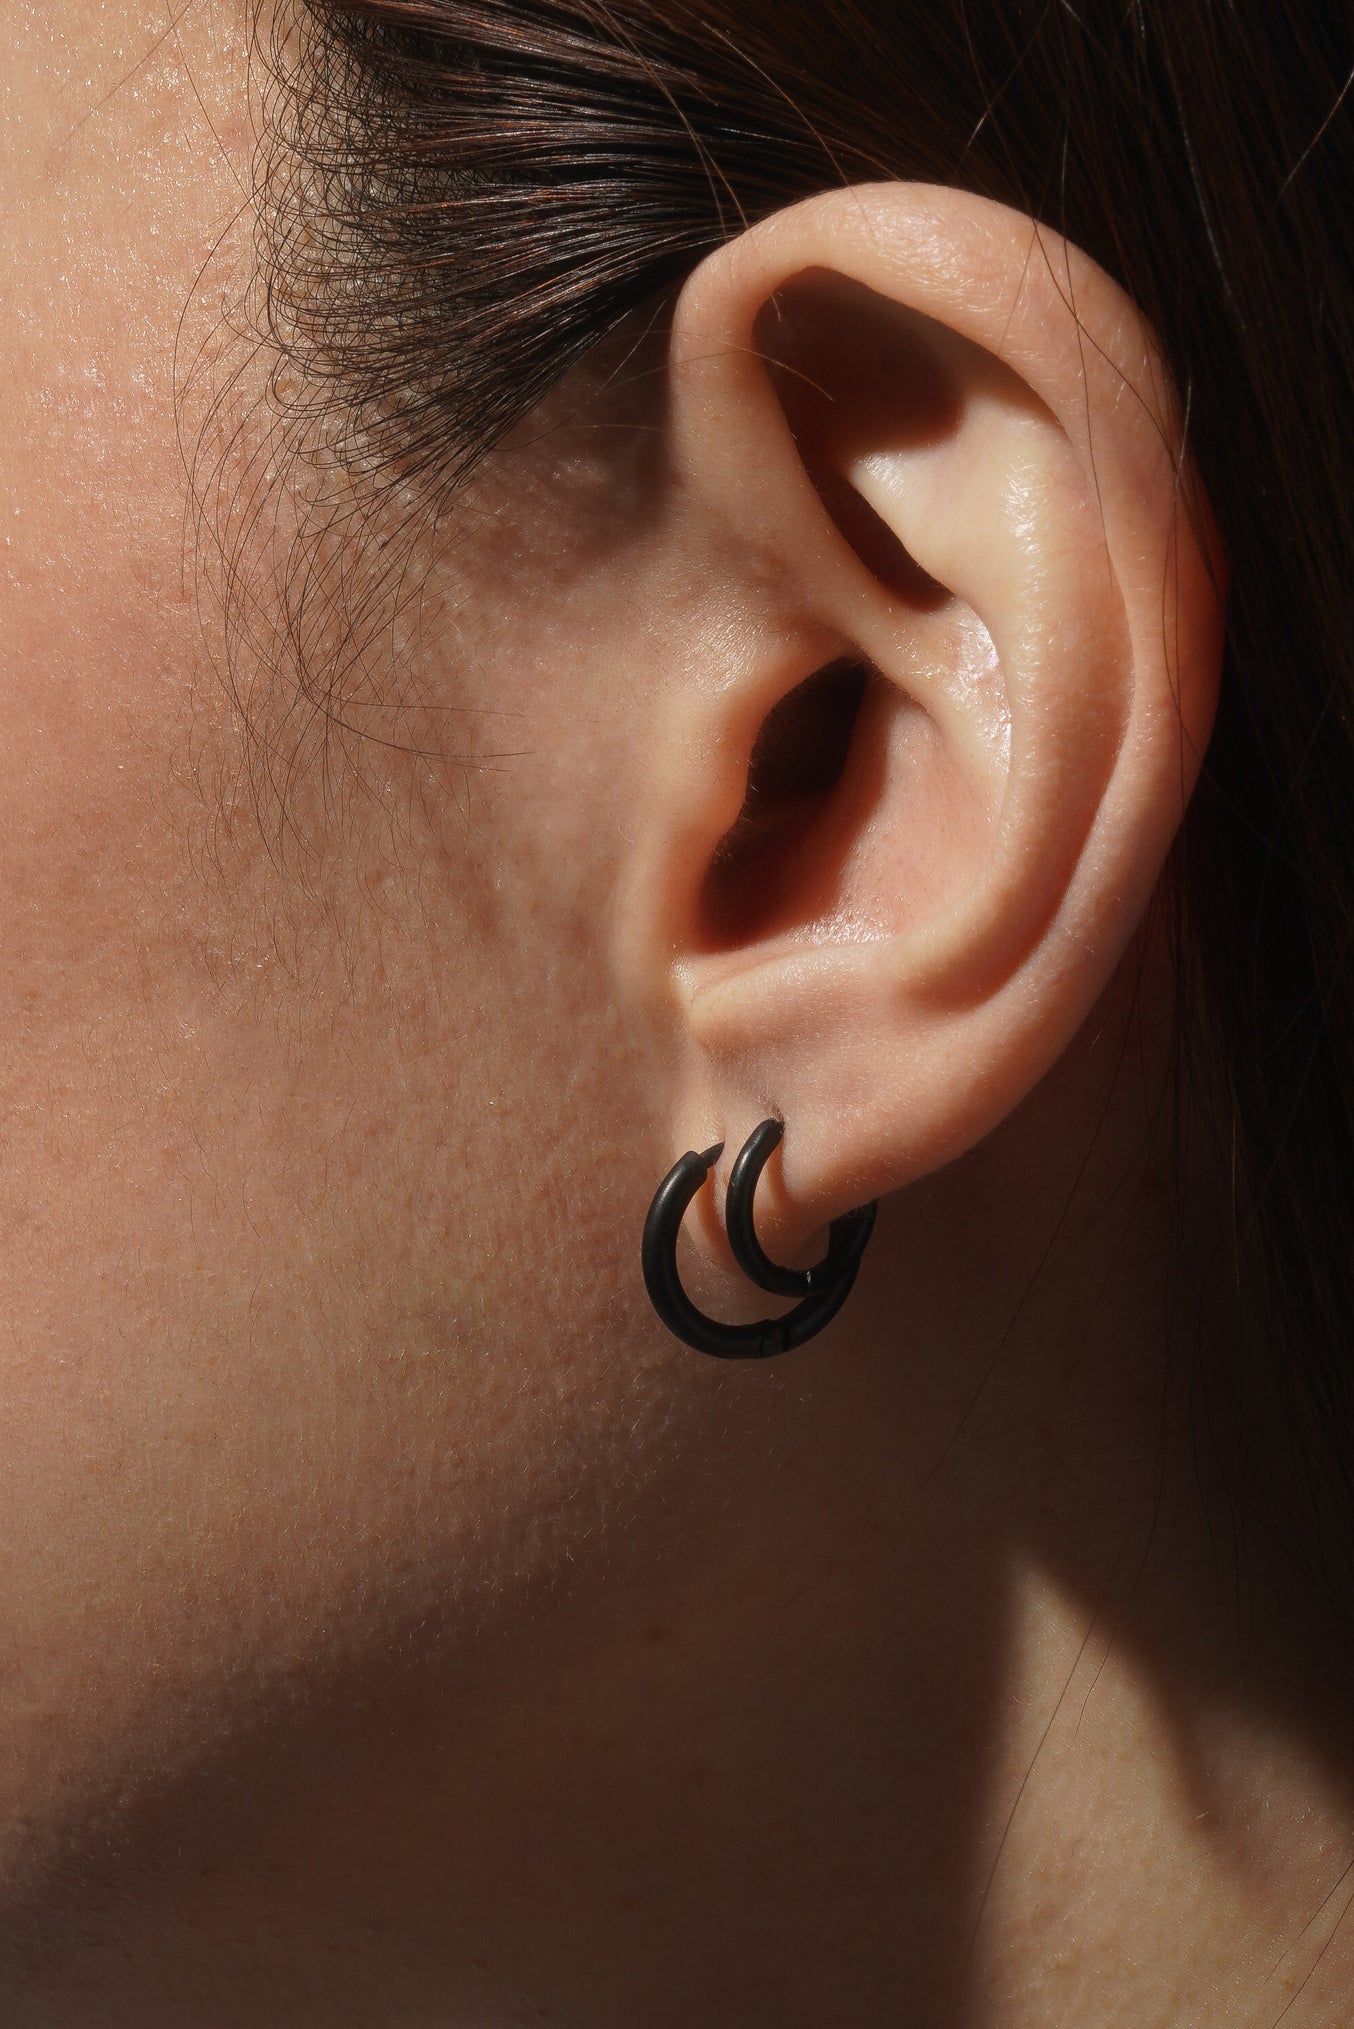 Small Infinity Hoops with Hanging Locks Rose Gold